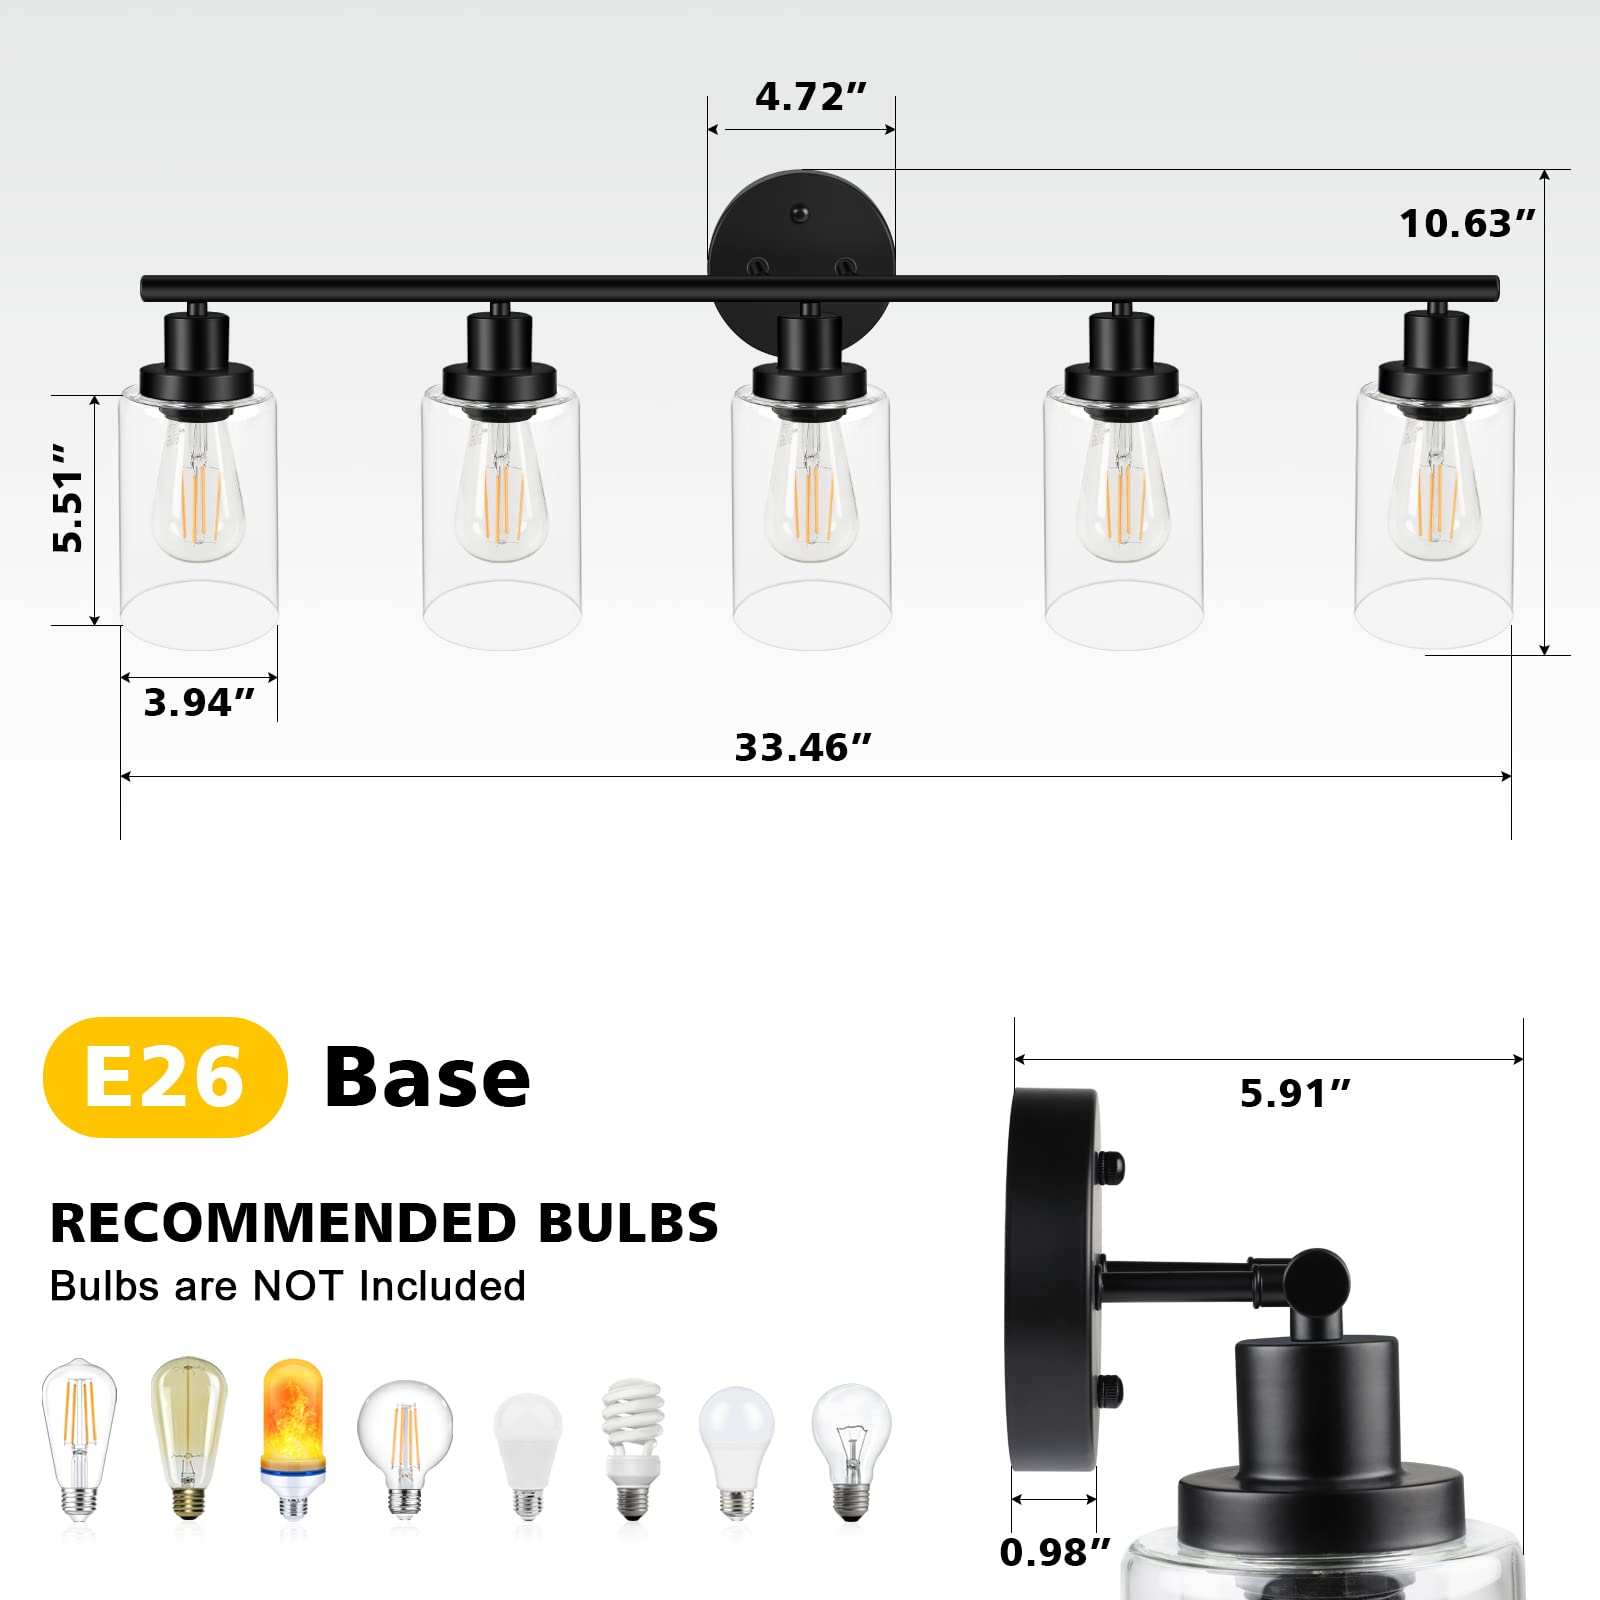 Unicozin Modern Matte Black 5 Lights Wall Lights, Wall Sconces Light with Clear Glass Shade, Vanity Light Fixtures for Bathroom, Living Room, Kitchen, Bedroom, E26 Base (Bulbs Not Included)